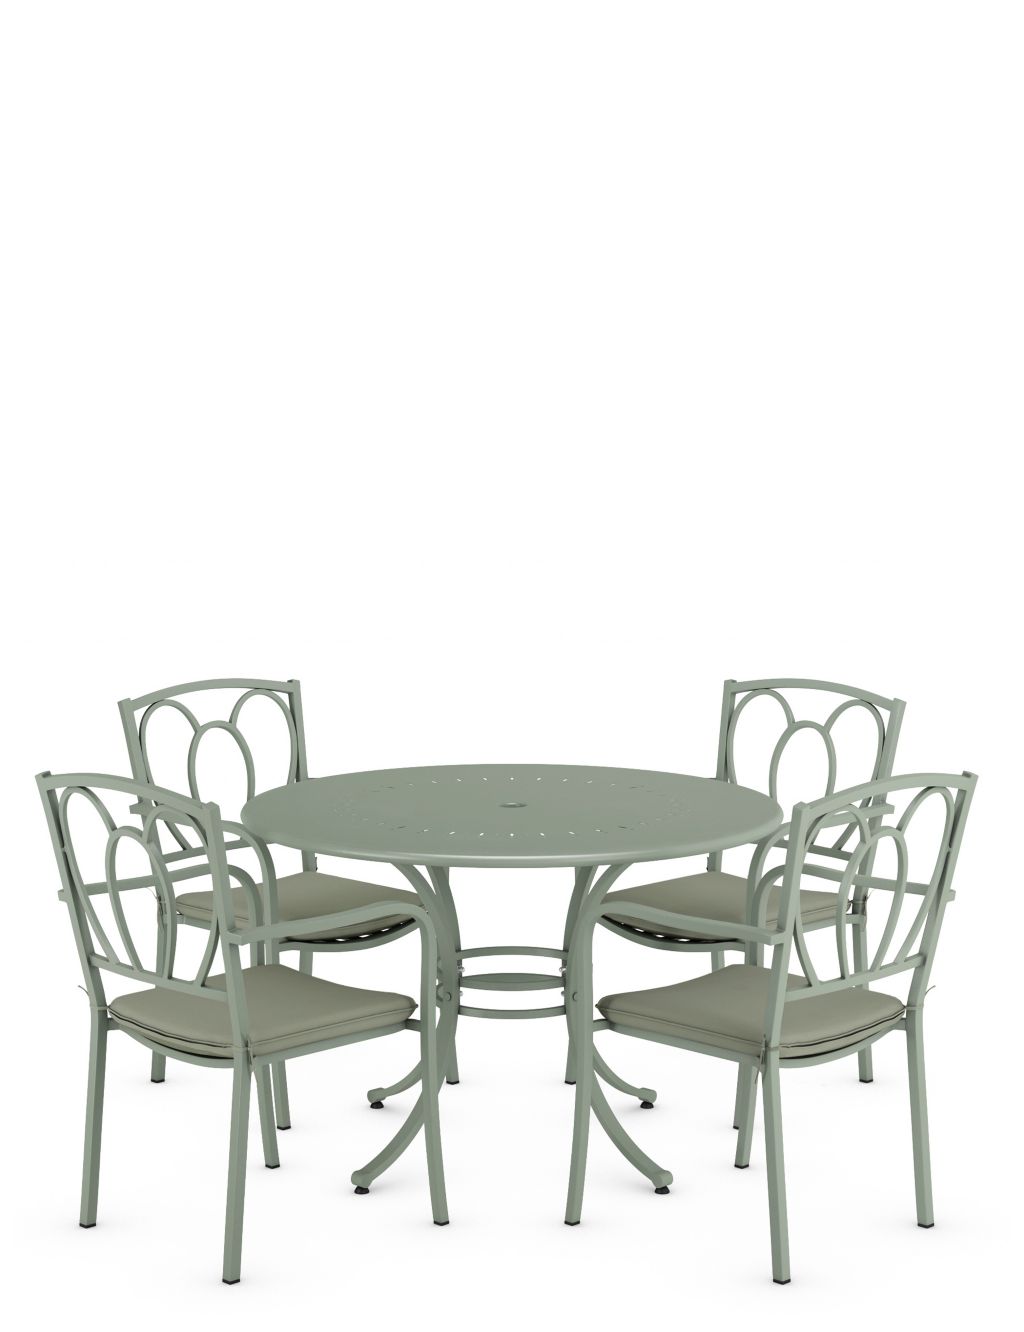 Stroud 4 Seater Garden Table & Chairs 1 of 6